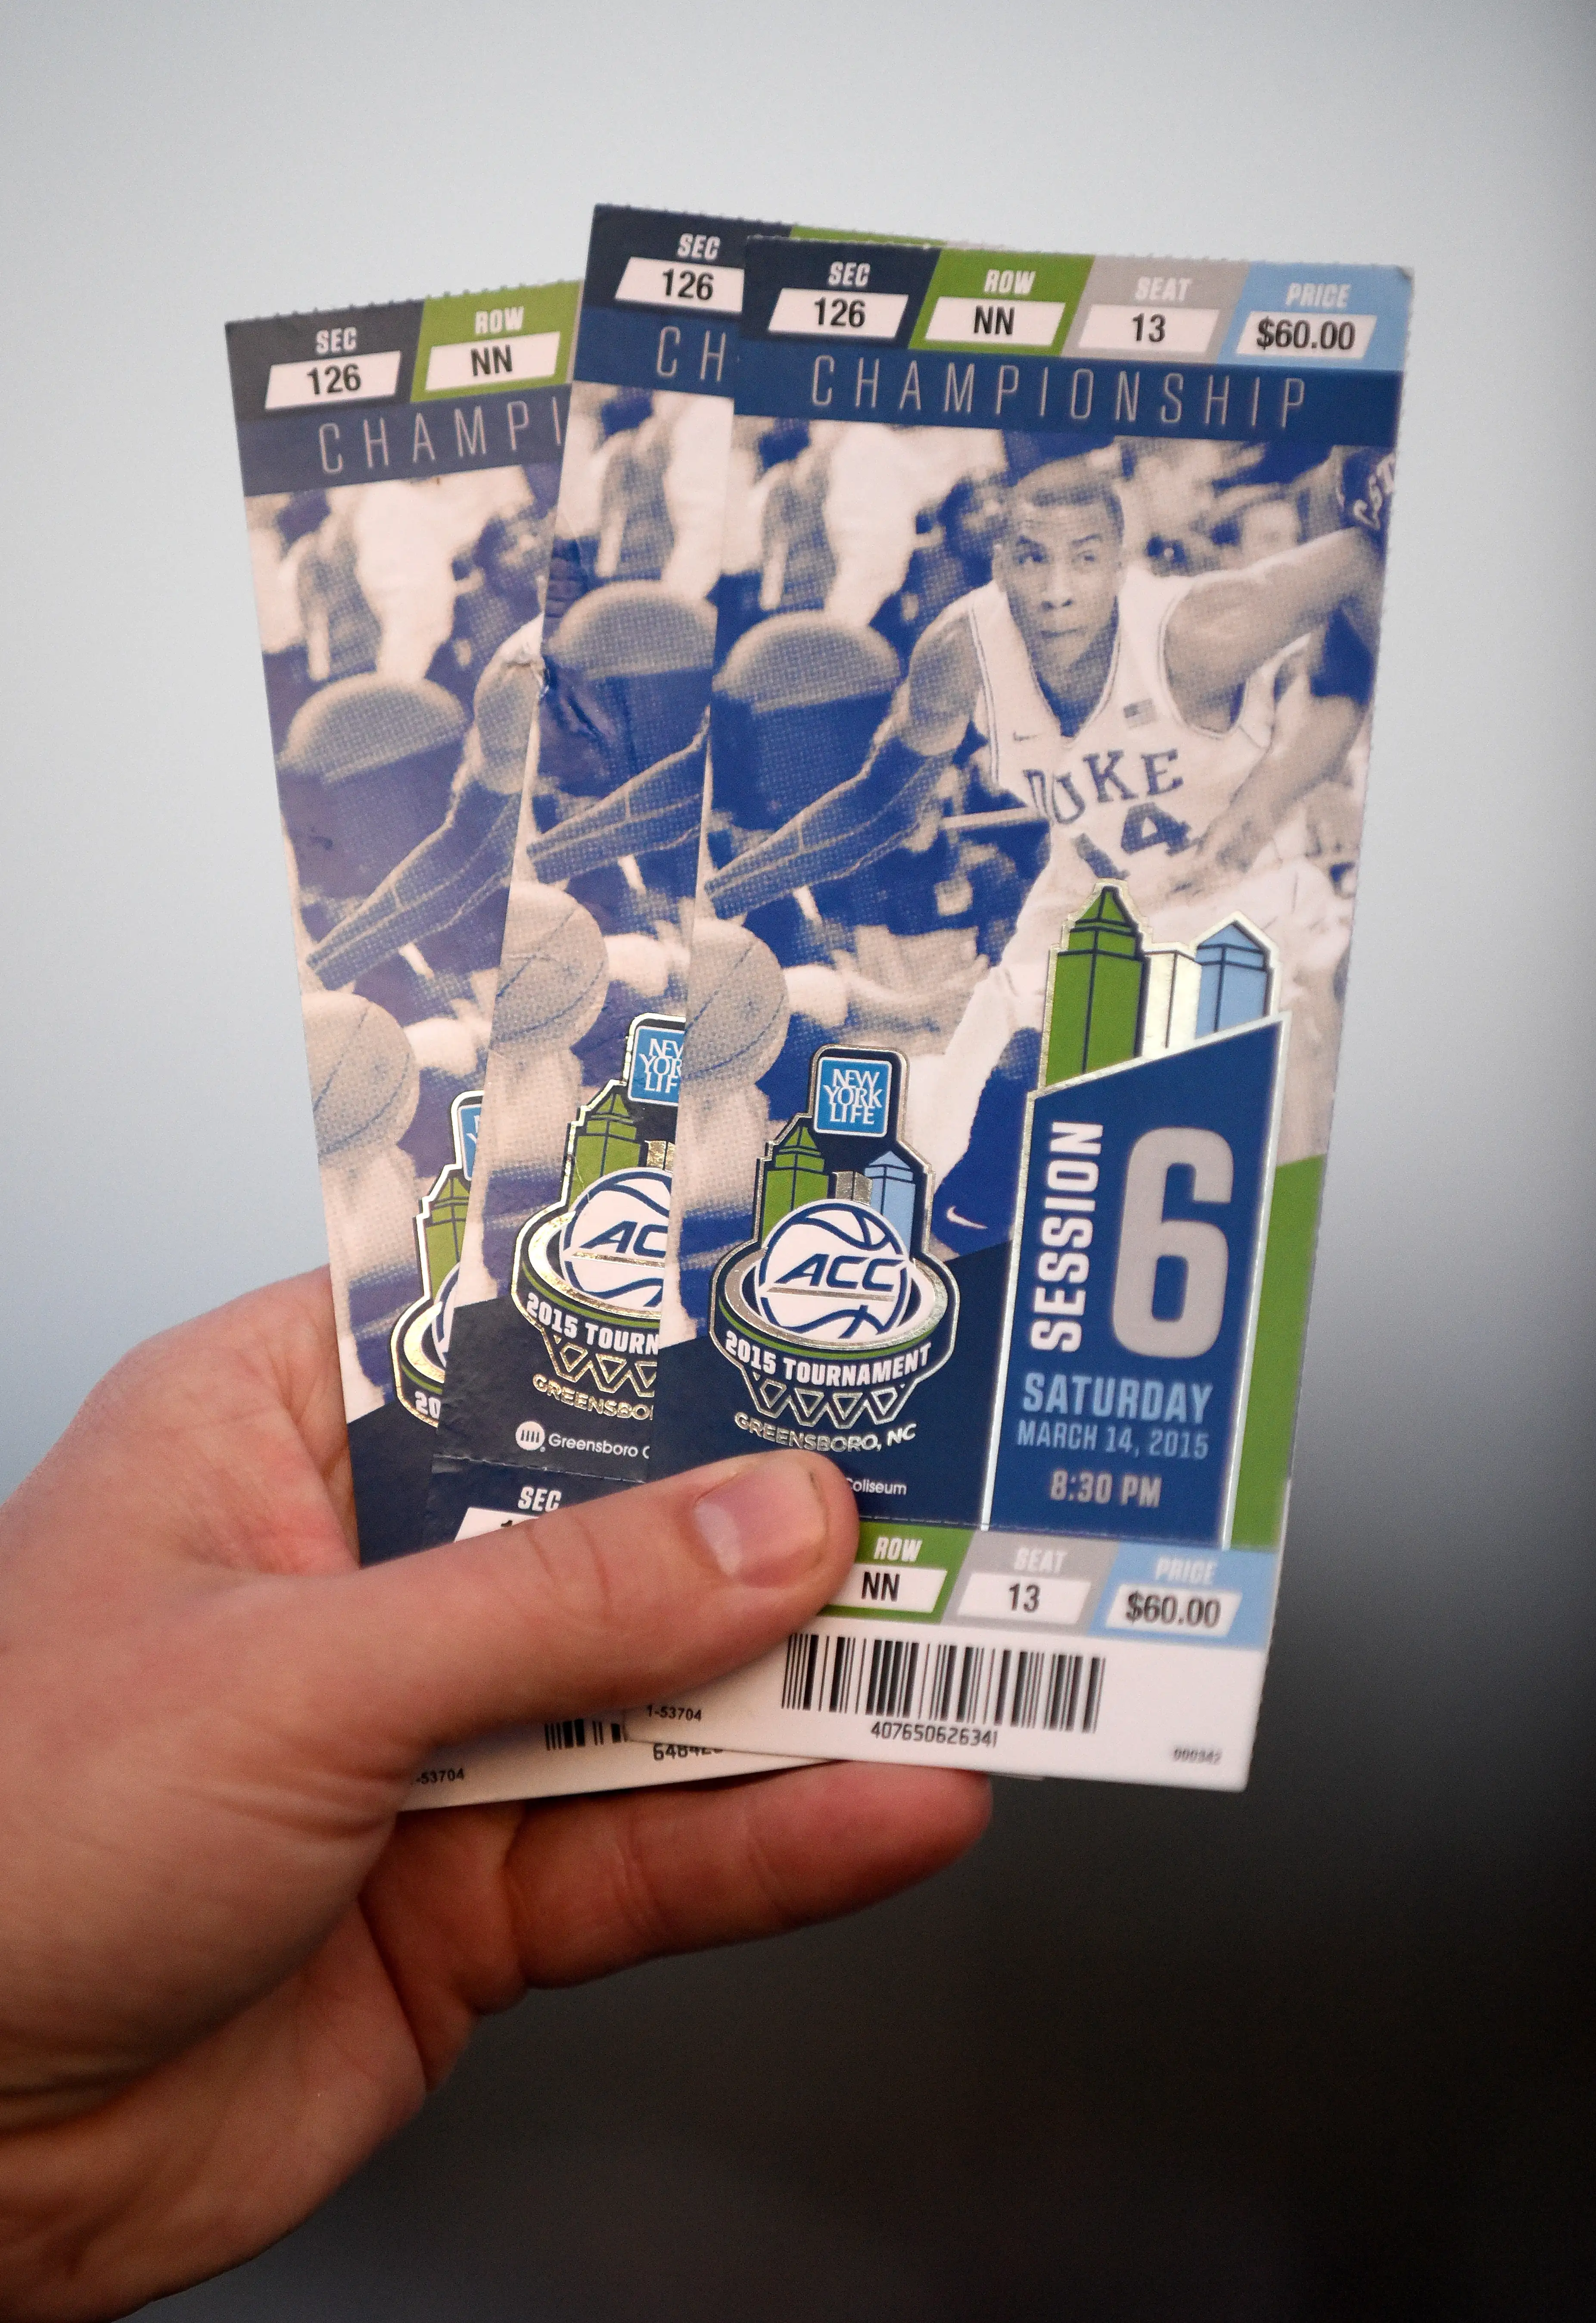 Tickets for the championship game with former Duke Blue Devil player Rasheed Sulaimon ahead of the game betweeen the North Carolina Tar Heels and Notre Dame Fighting Irish for the 2015 ACC Basketball Tournament Championship game at Greensboro Coliseum on March 14, 2015 in Greensboro, North Carolina.